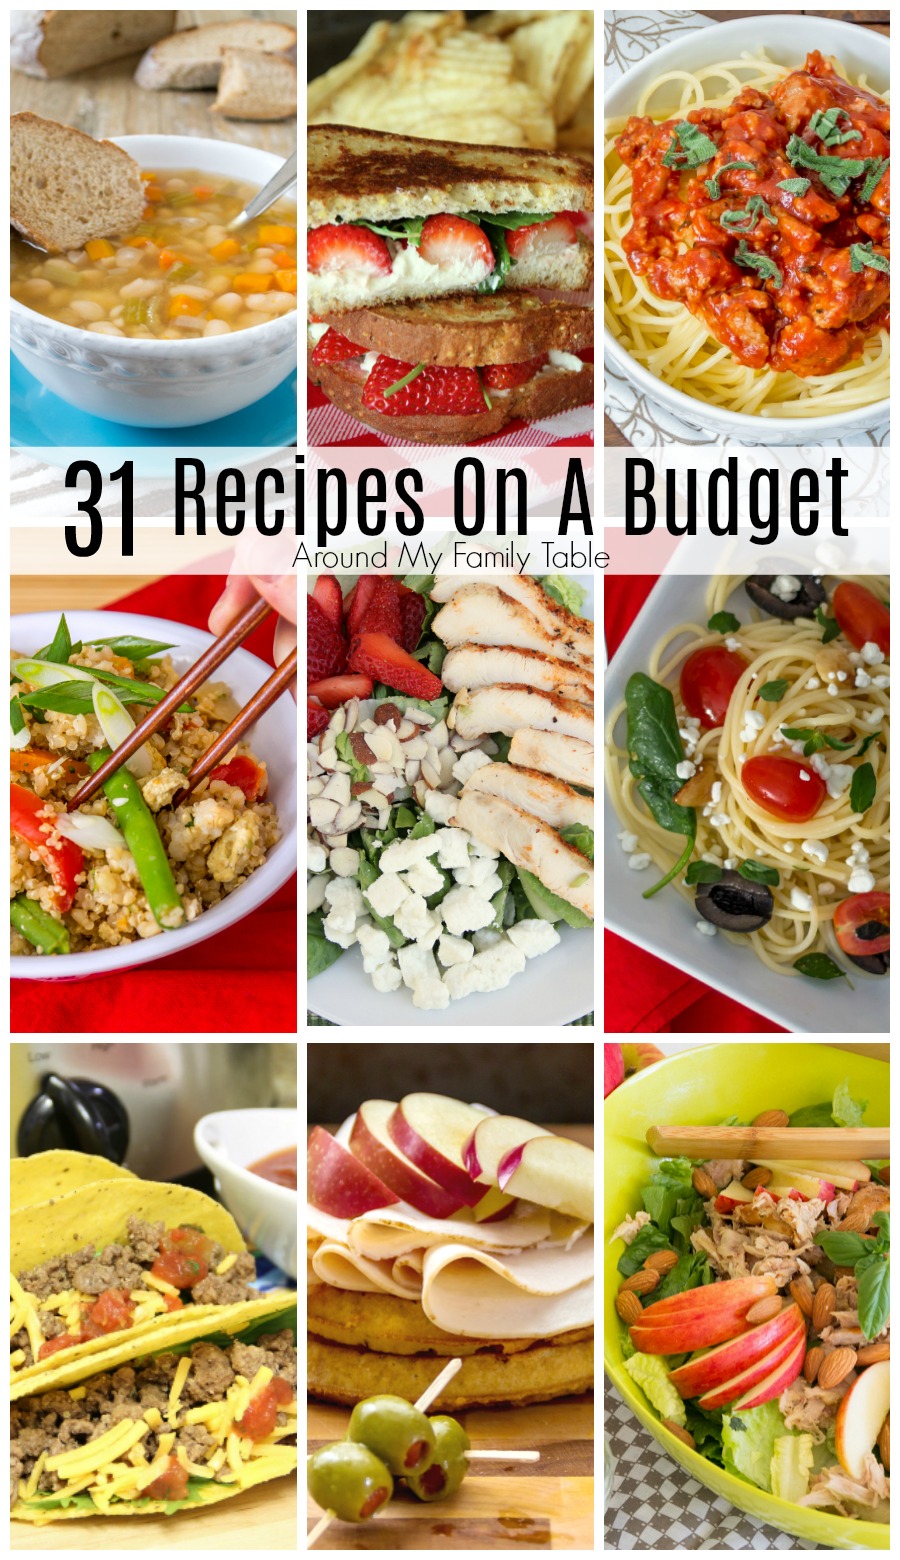 Recipes on a Budget - Around My Family Table